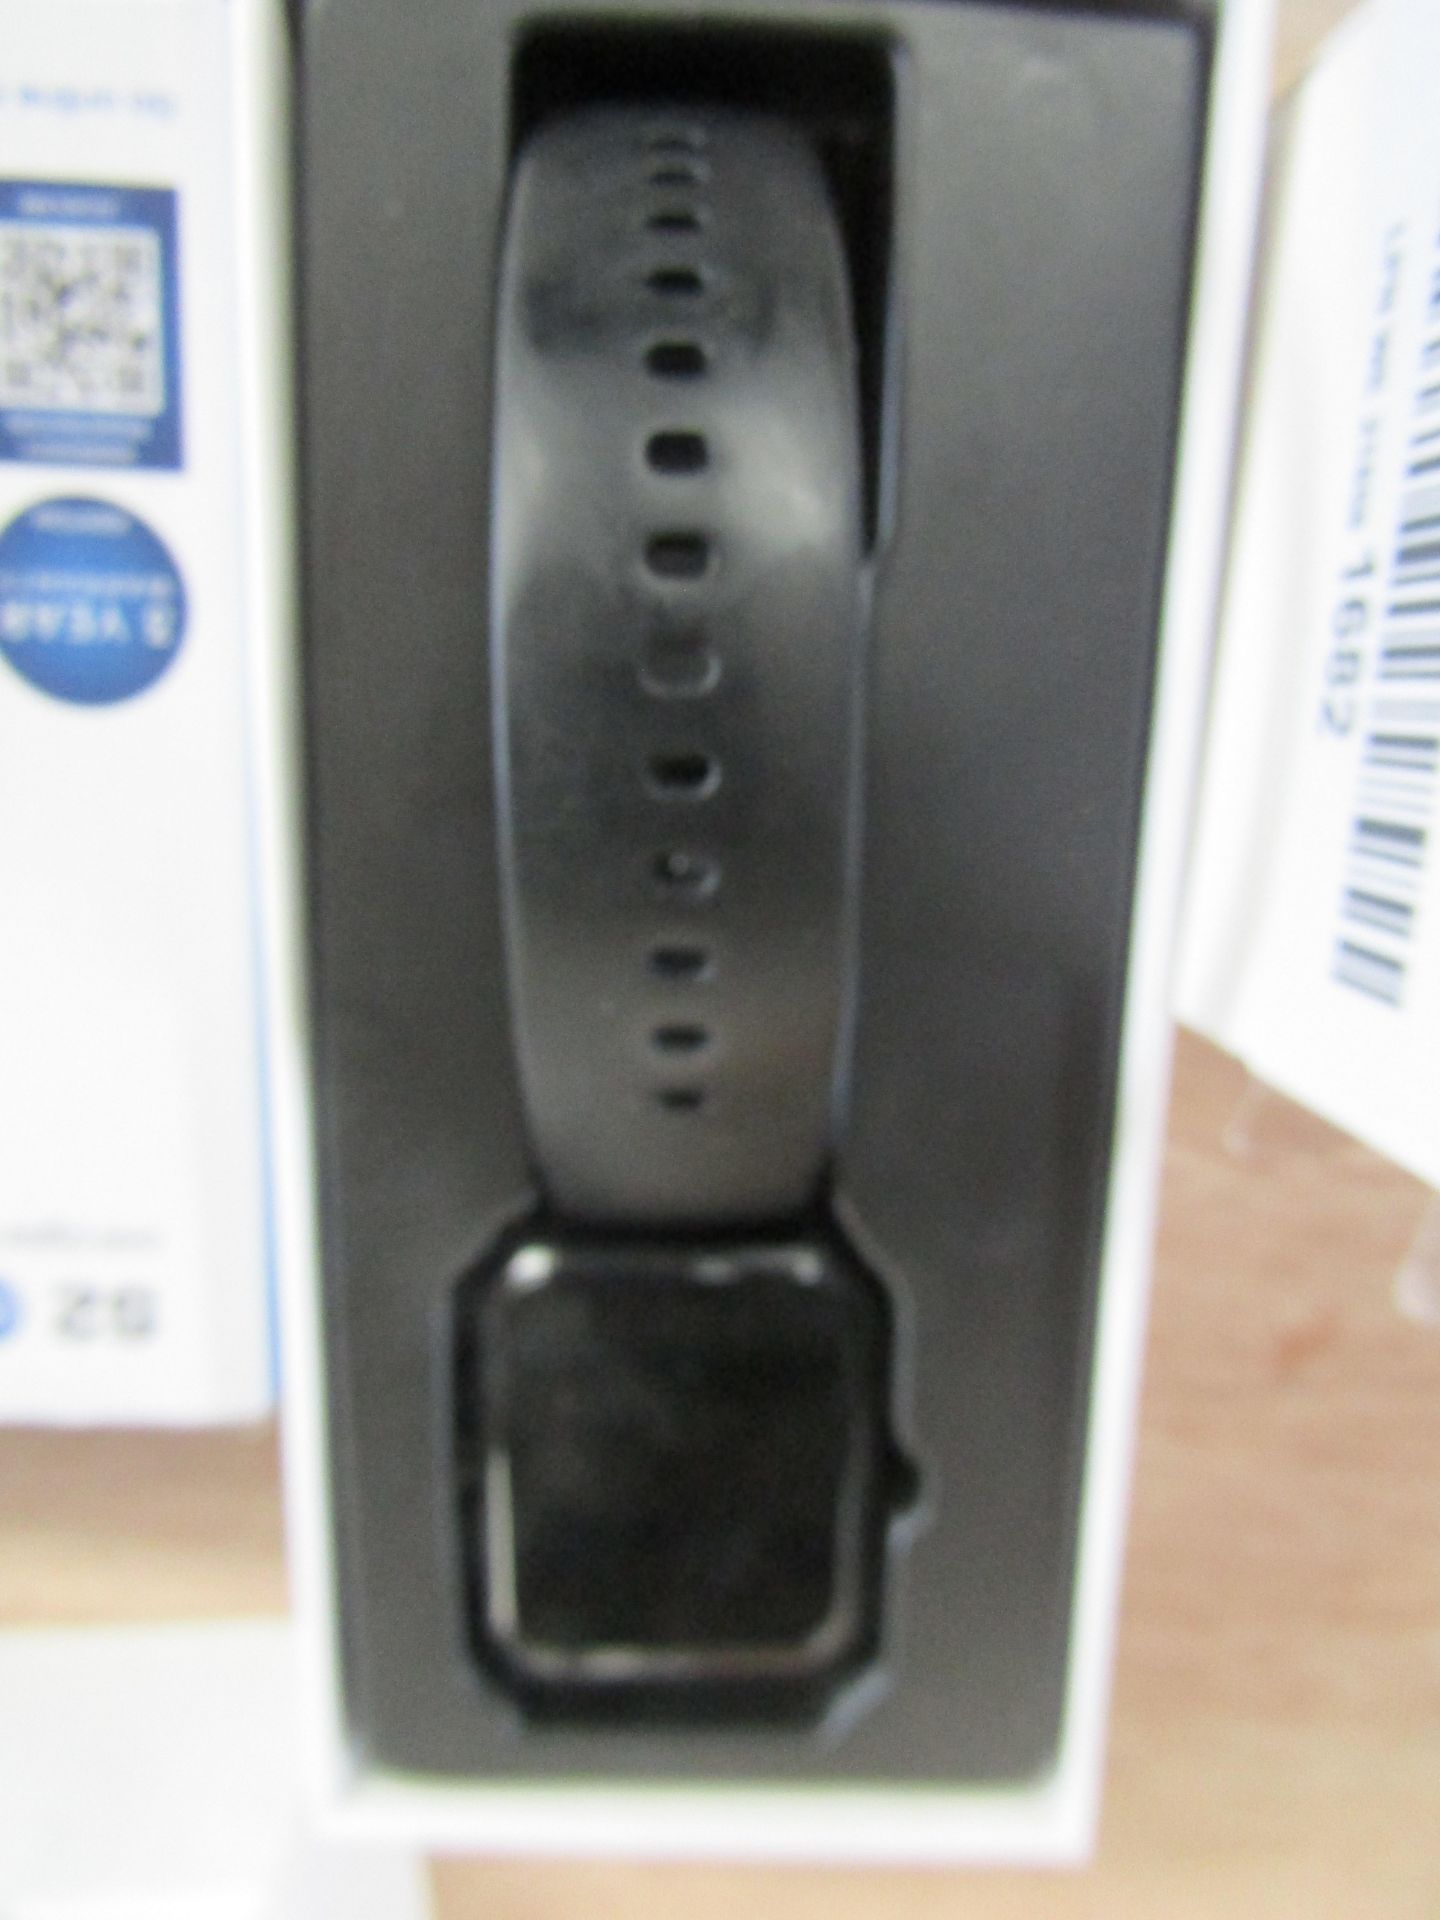 DO Sports Black Smart Watch With Black Straps - Unchecked & Boxed.